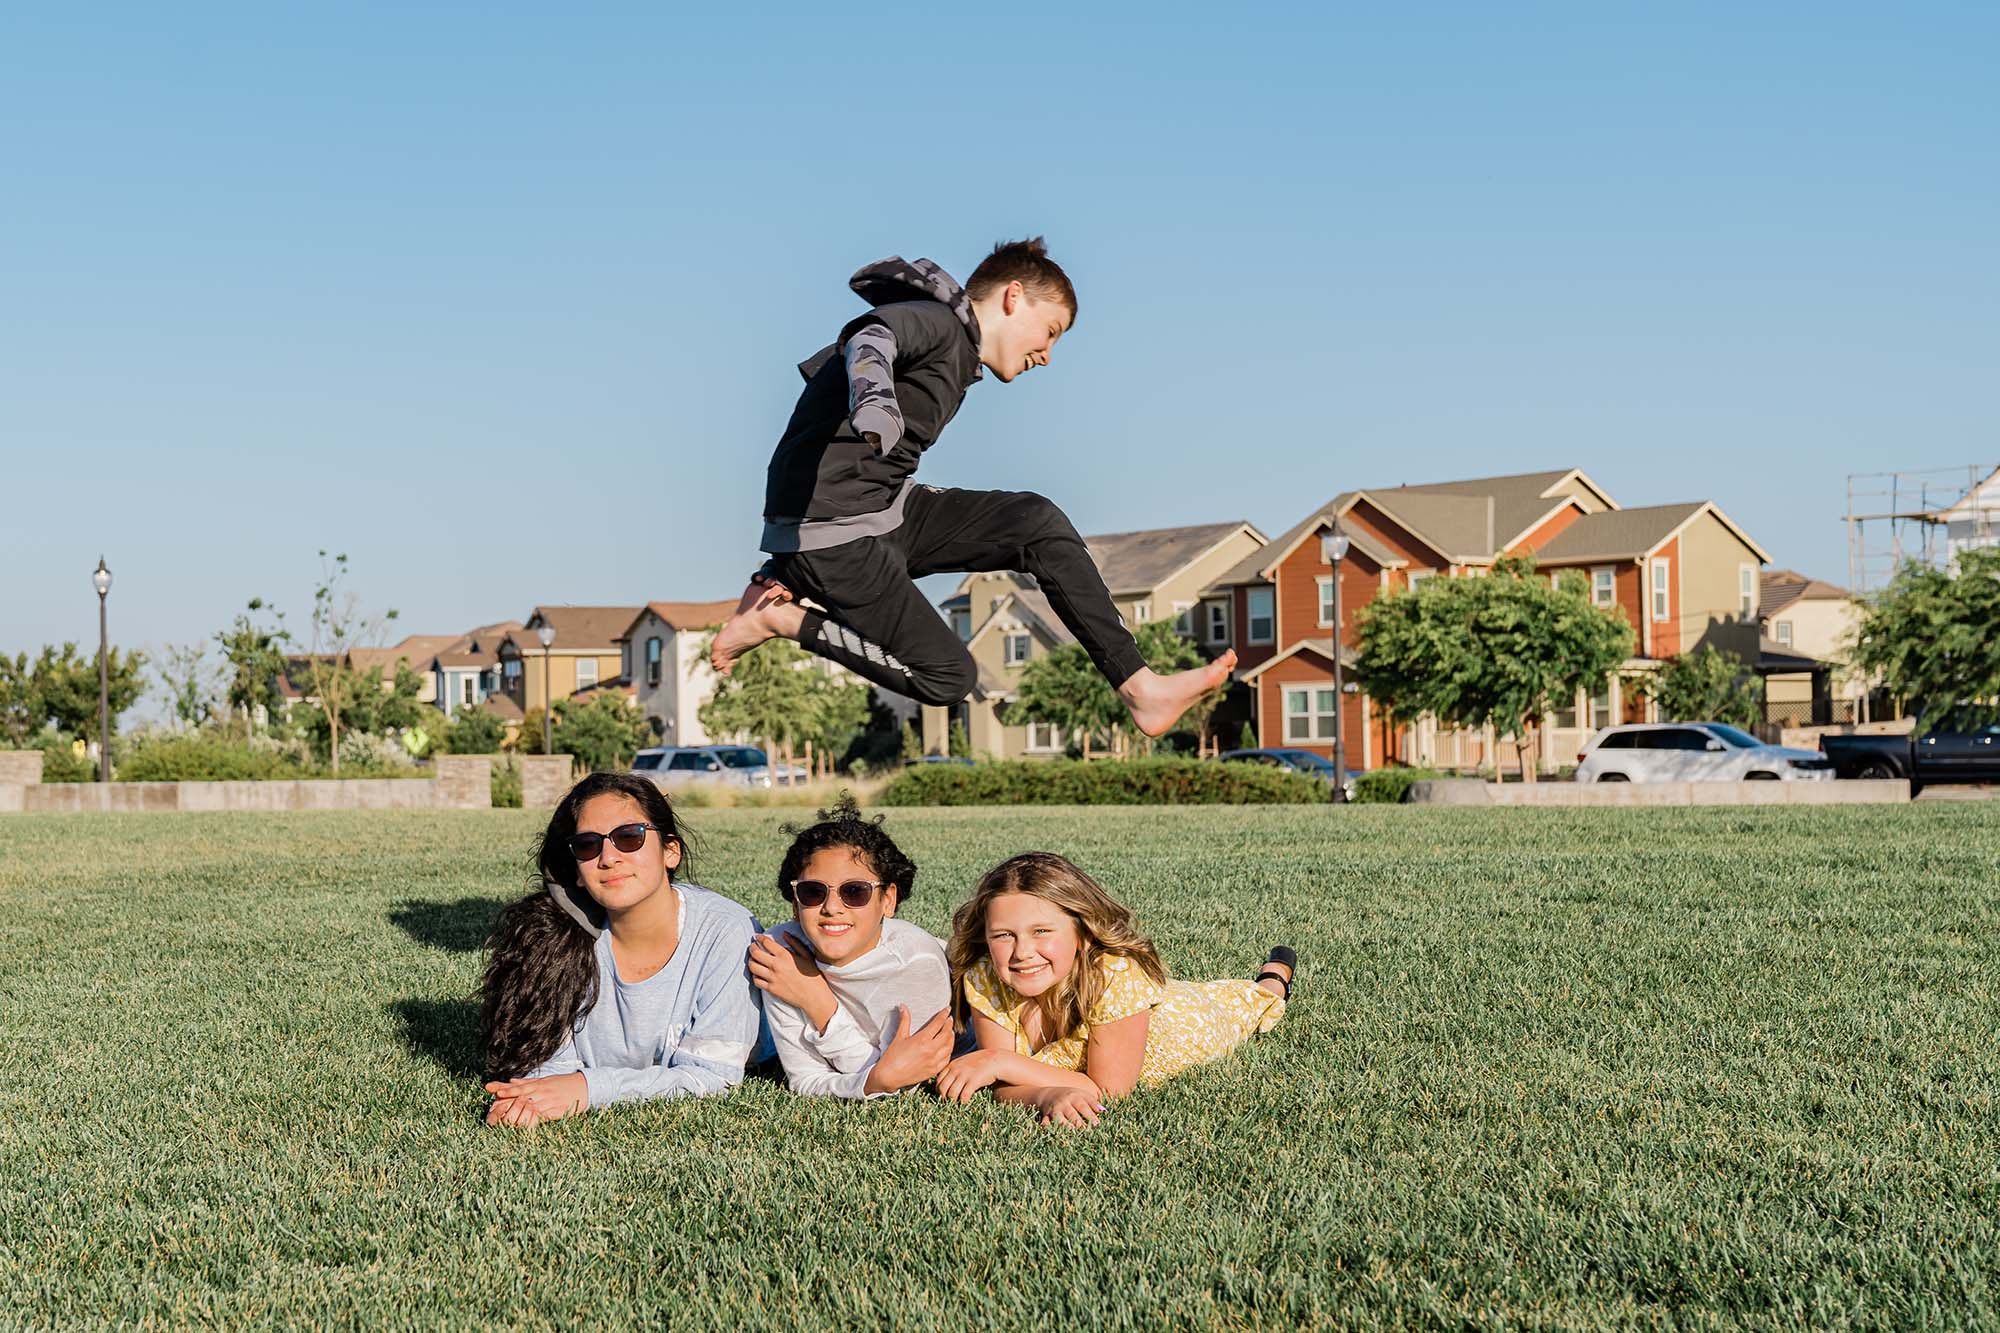 Boy jumping over three girls in a park.